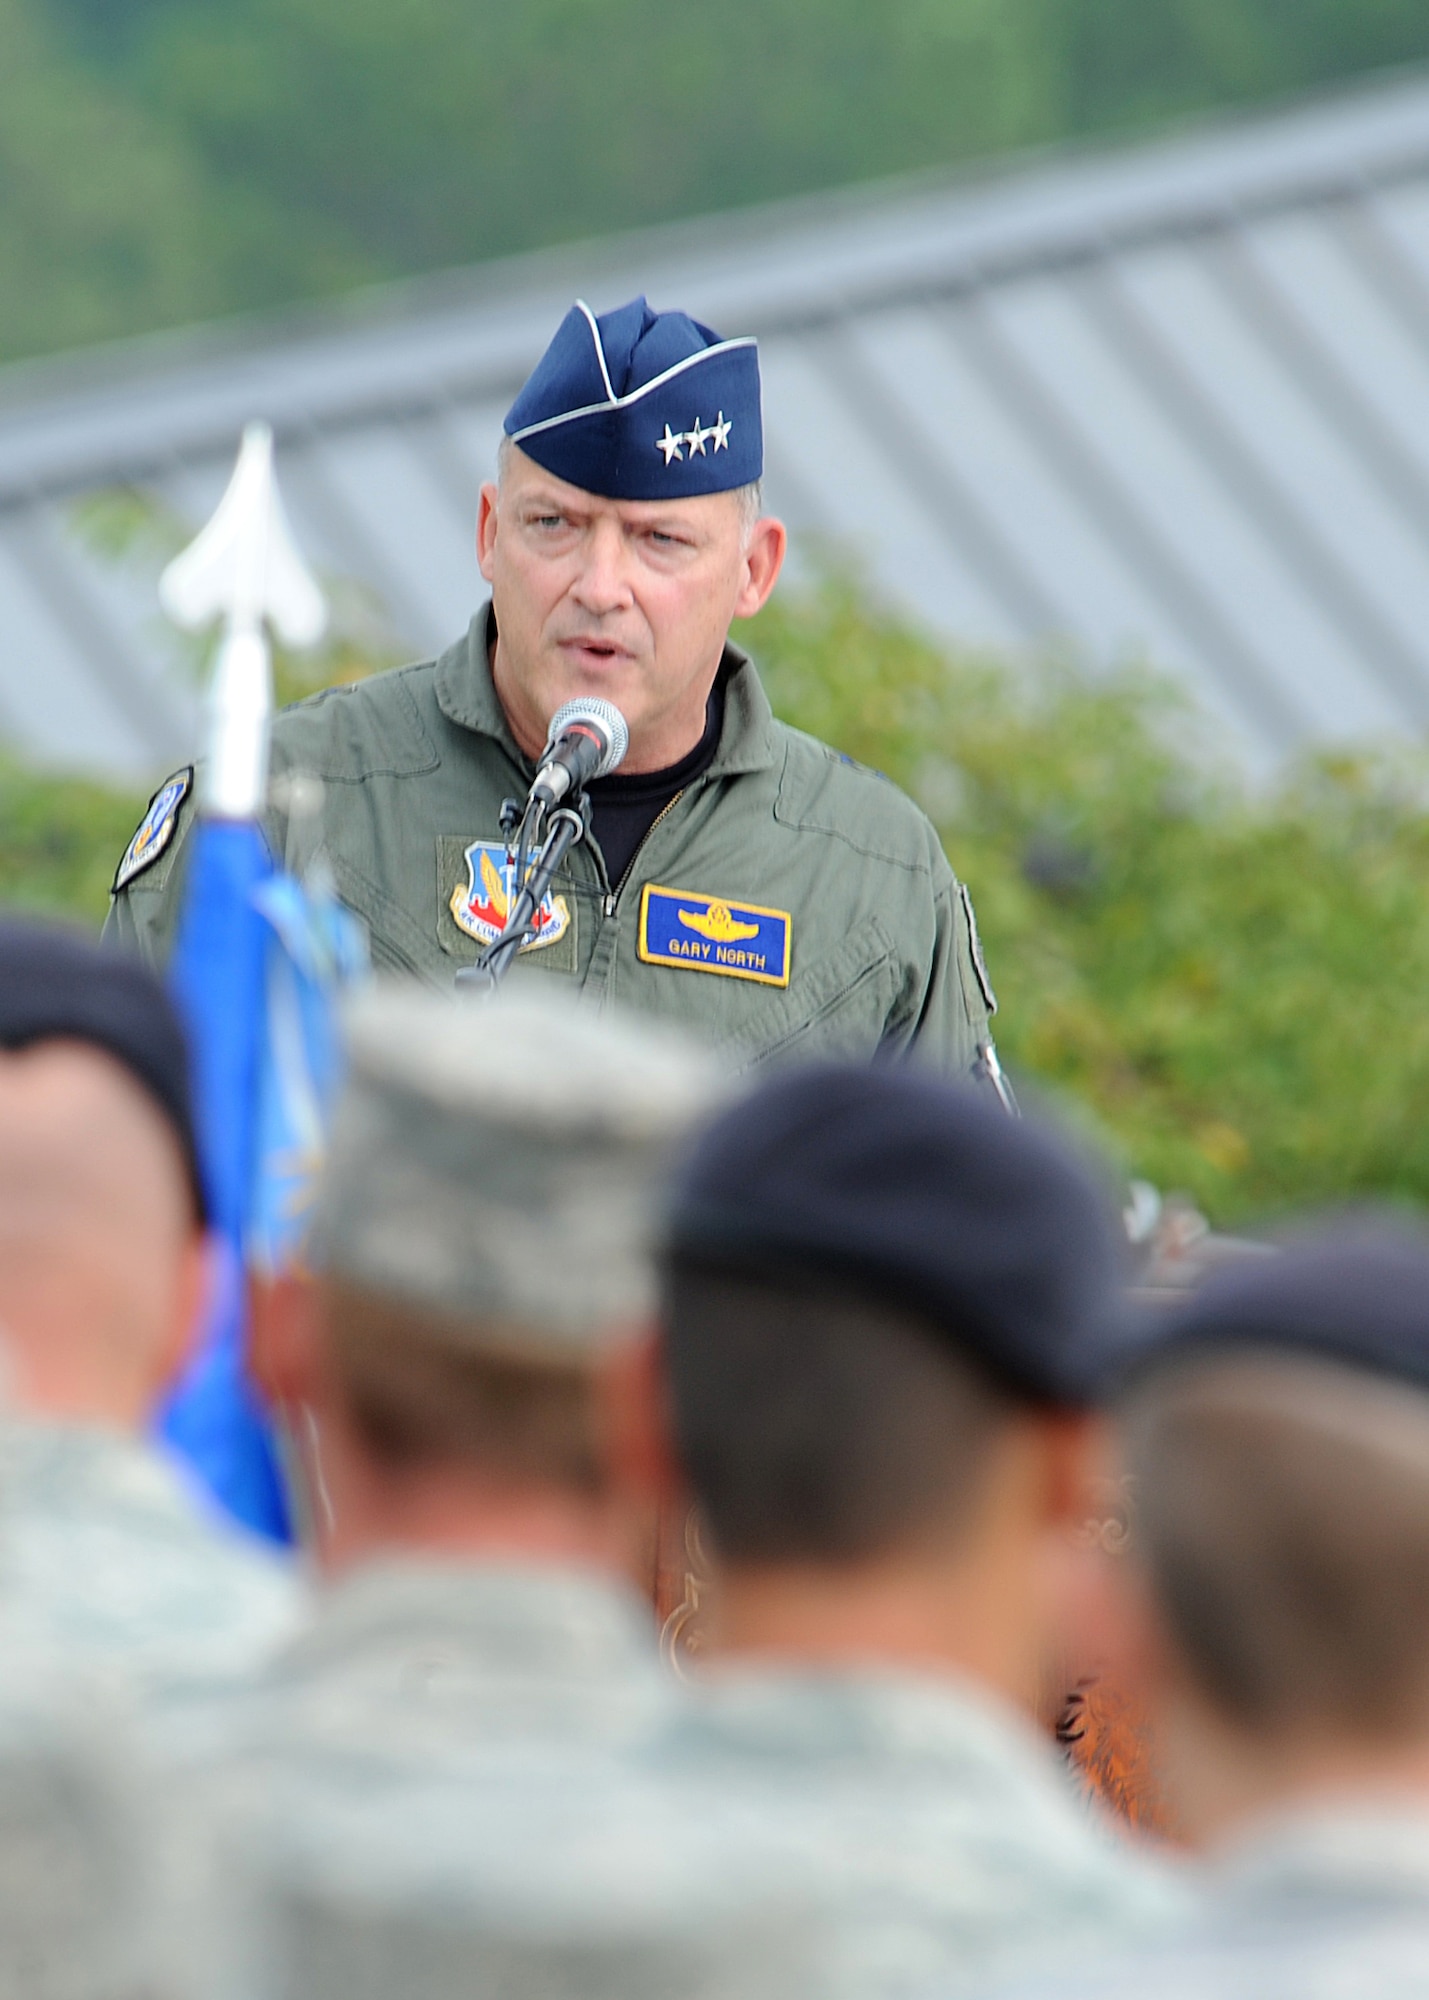 Lt. General Gary North speaks to the Airmen at the 4th Fighter Wing about Col. Steve Kwast's leadership on Sept. 9, 2008.General North was the presiding official for the change of command ceremony at Seymour Johnson Air Force Base, N.C. (U.S. Air Force photo by Airman 1st Class Whitney Stanfield)